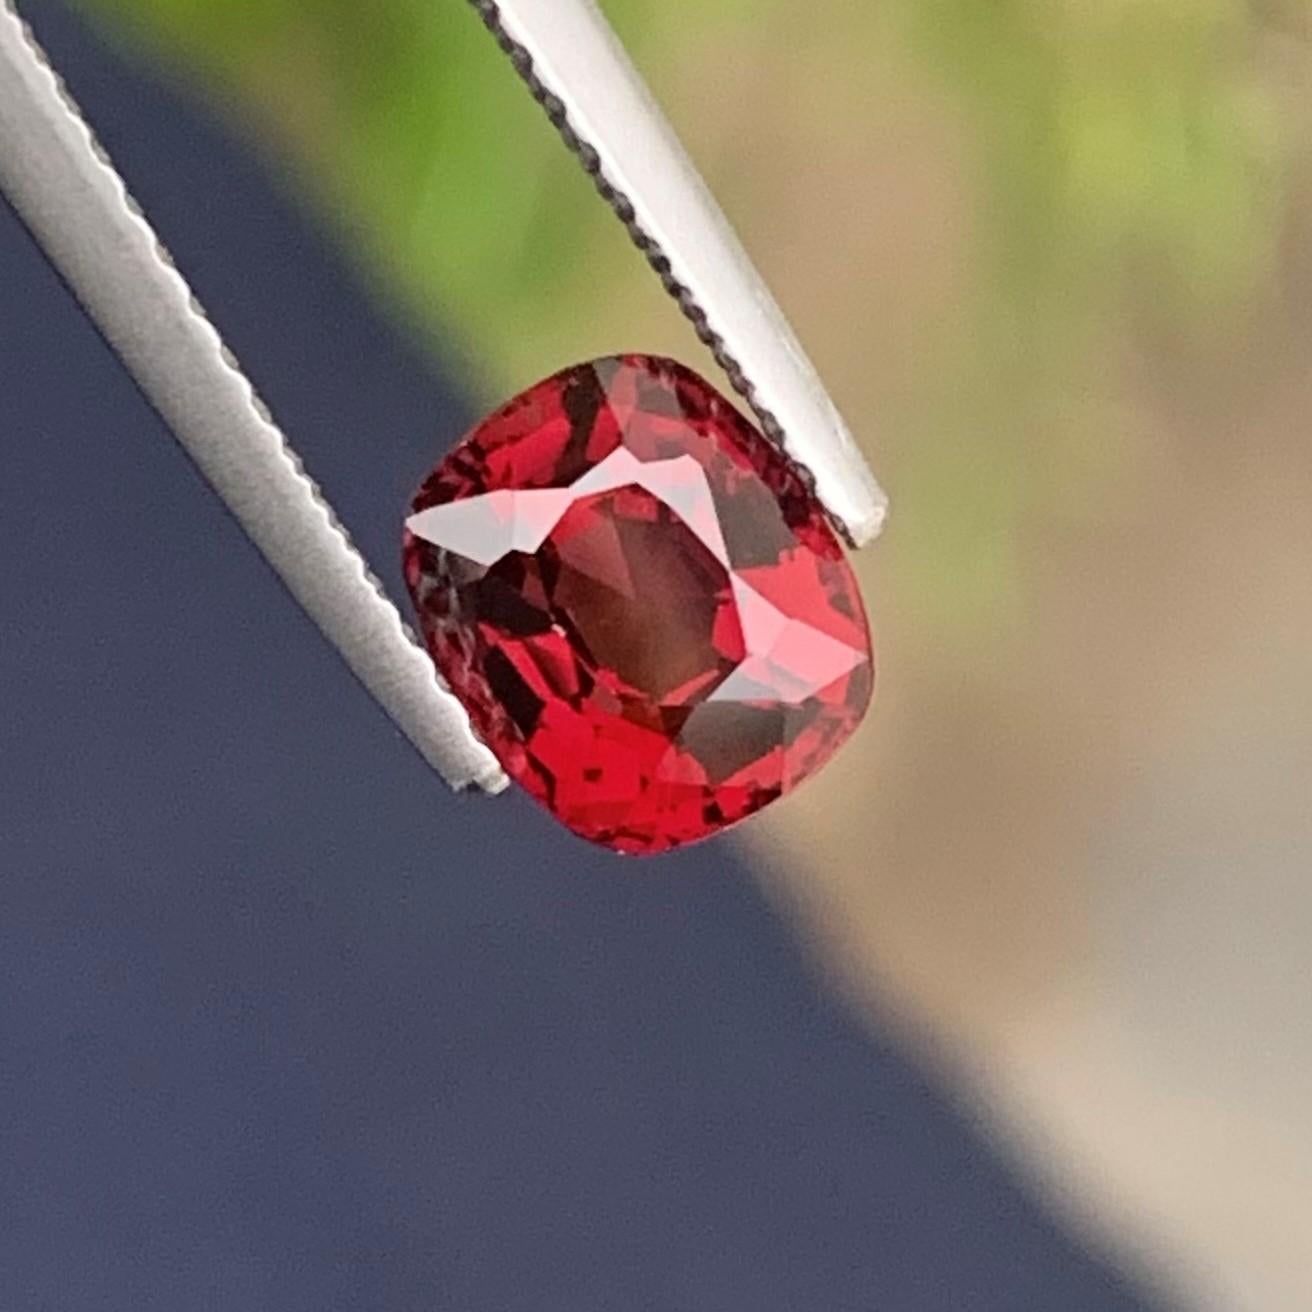 Gorgeous Loose Spinel
Weight: 1.60 Carats
Dimension: 7x5.9x4.6 Mm
Origin: Burma
Color: Red
Shape: Cushion
Treatment: Non
Certificate : on demand
.
Spinel gems are said to help set aside egos and become devoted to another person. Like most fiery red